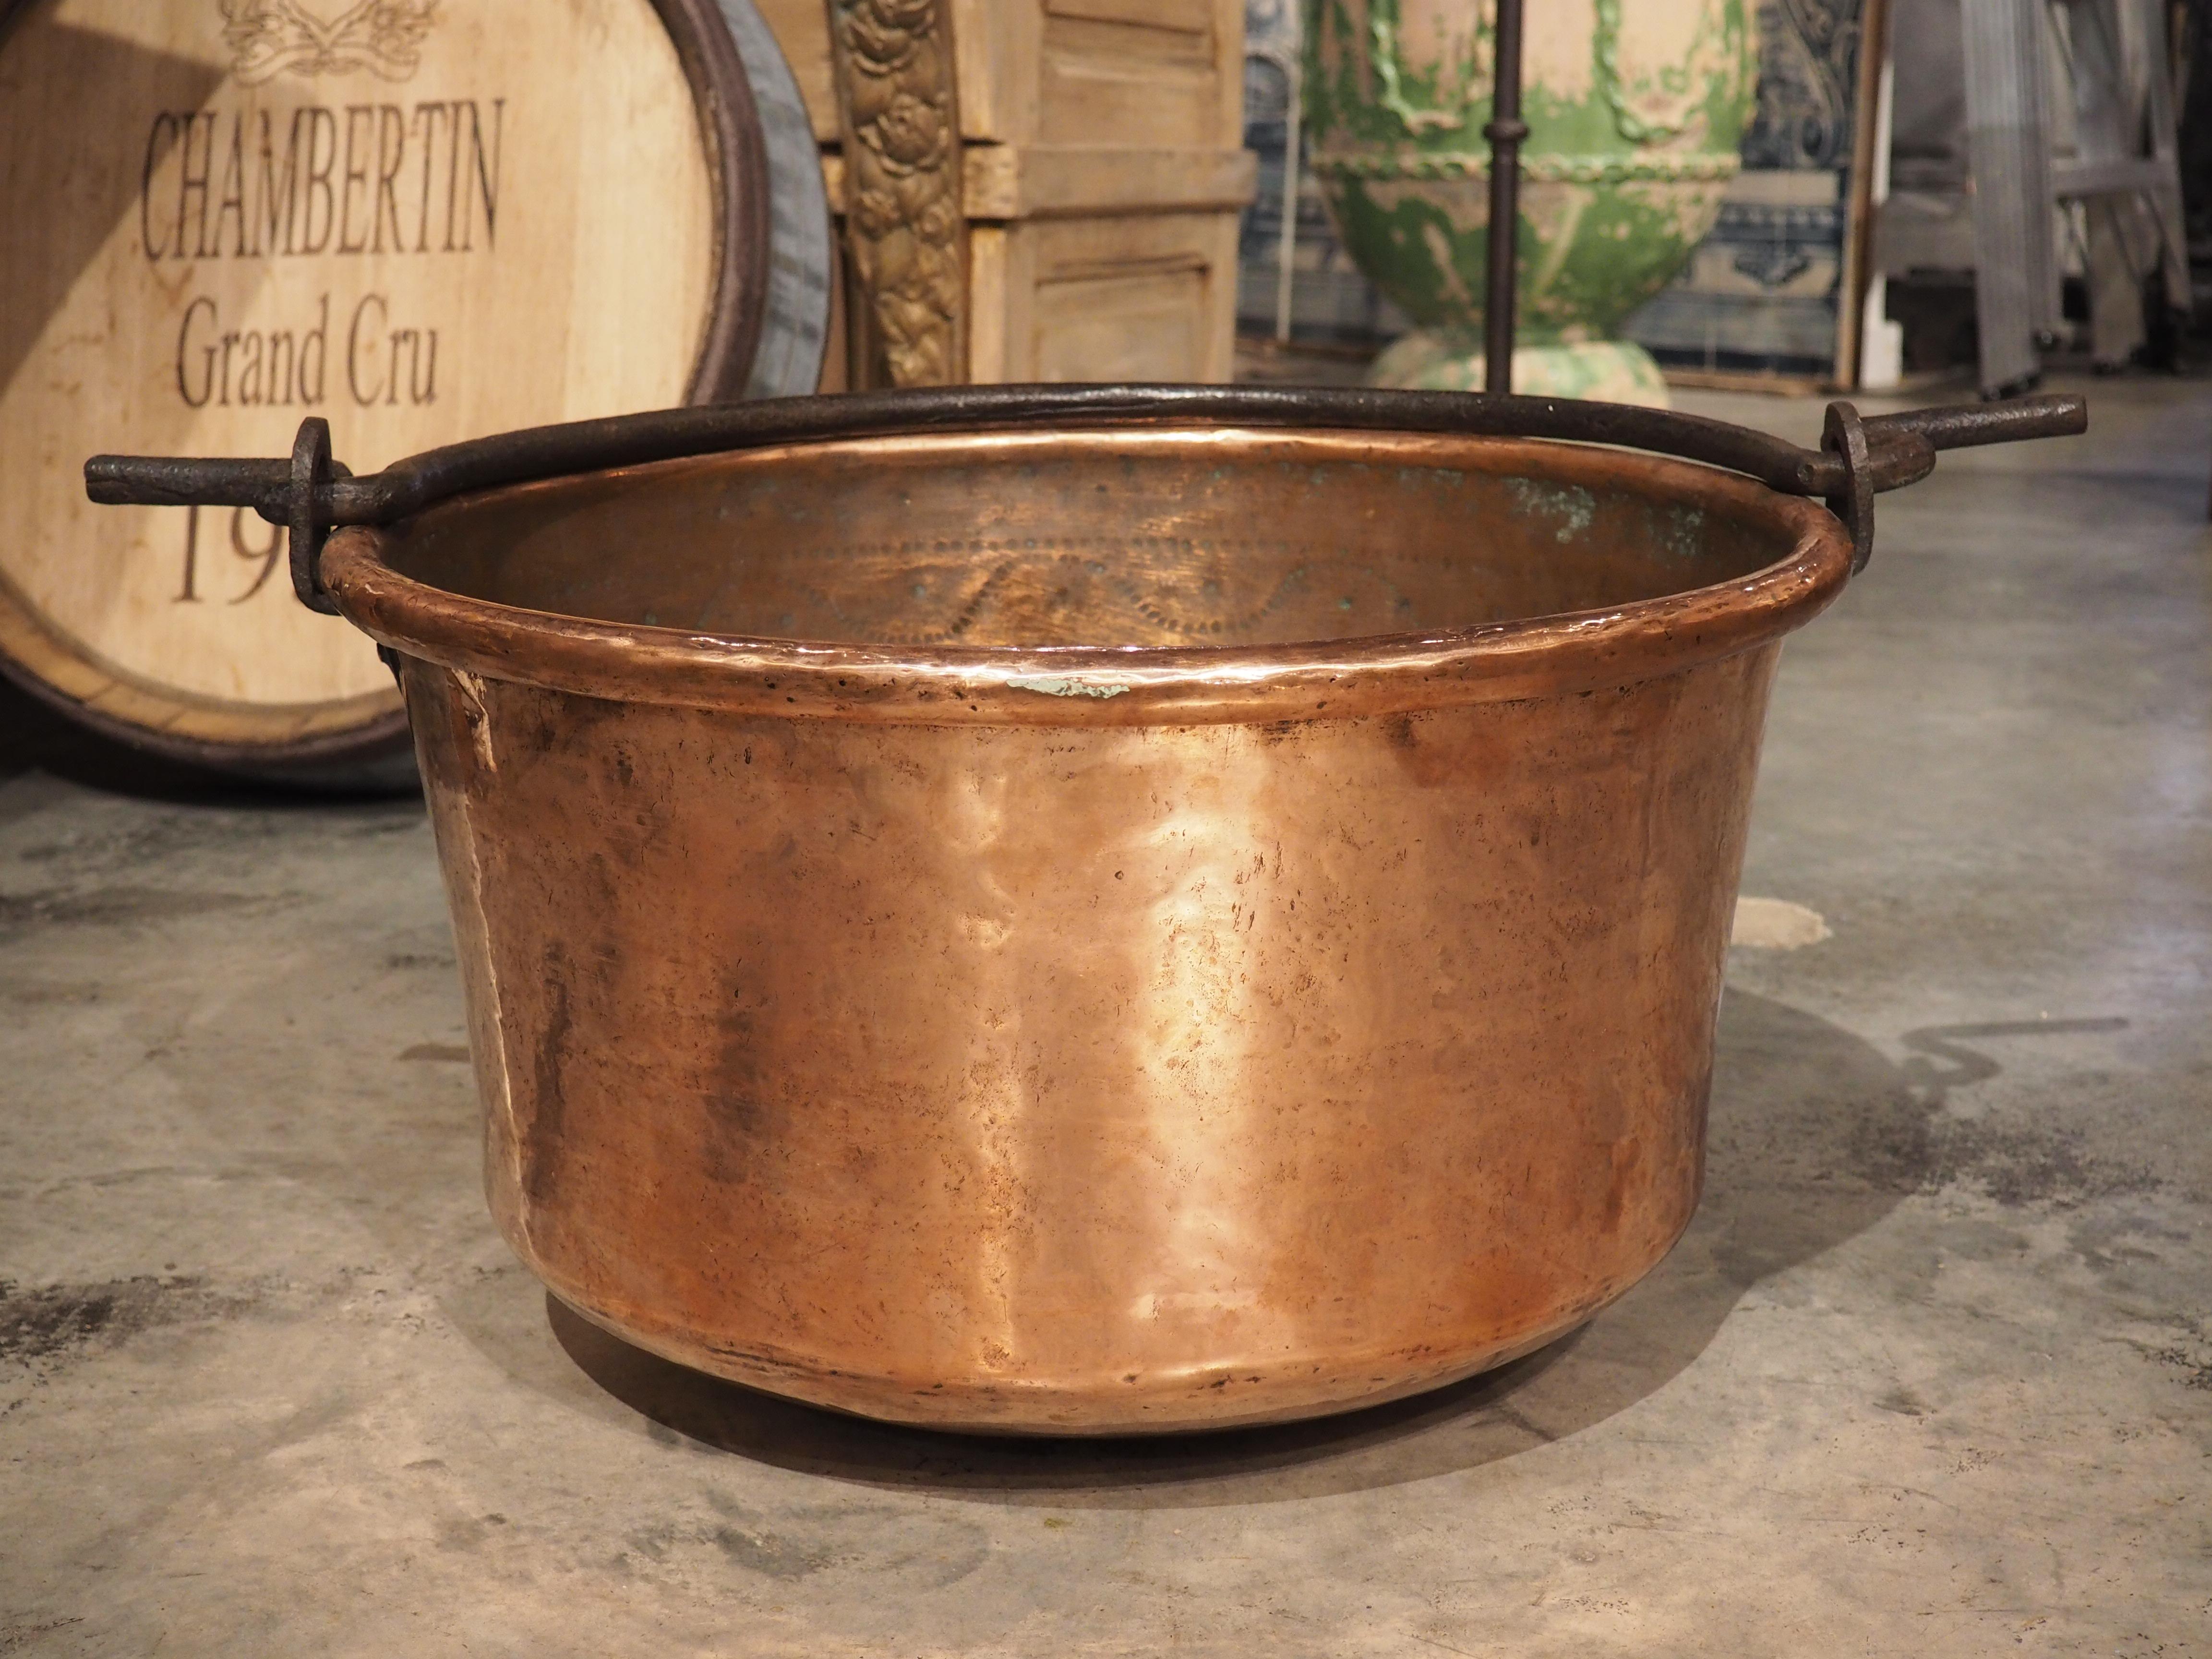 Antique copper cookware, such as this polished chaudron with wrought iron handle are highly sought-after decorative pieces due to their unique color and (typically) bright patina. handcrafted in France, circa 1850, our chaudron has a shaped wrought